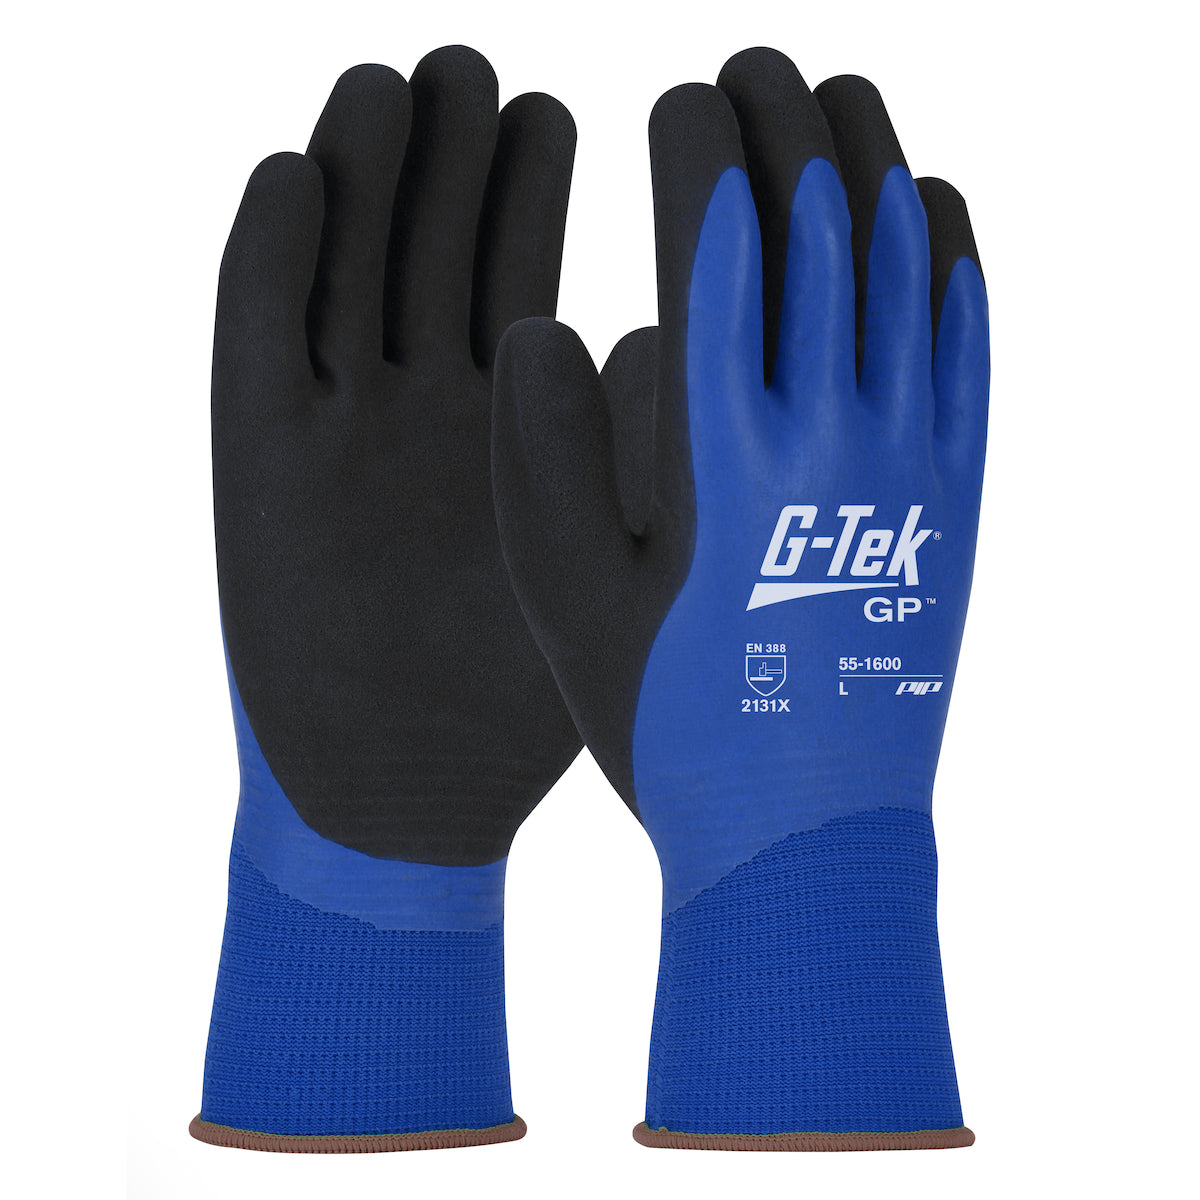 PIP 55-1600 G-Tek GP Waterproof Seamless Knit Nylon Gloves - Double Dipped Latex Coated Grip (12 Pairs)-eSafety Supplies, Inc